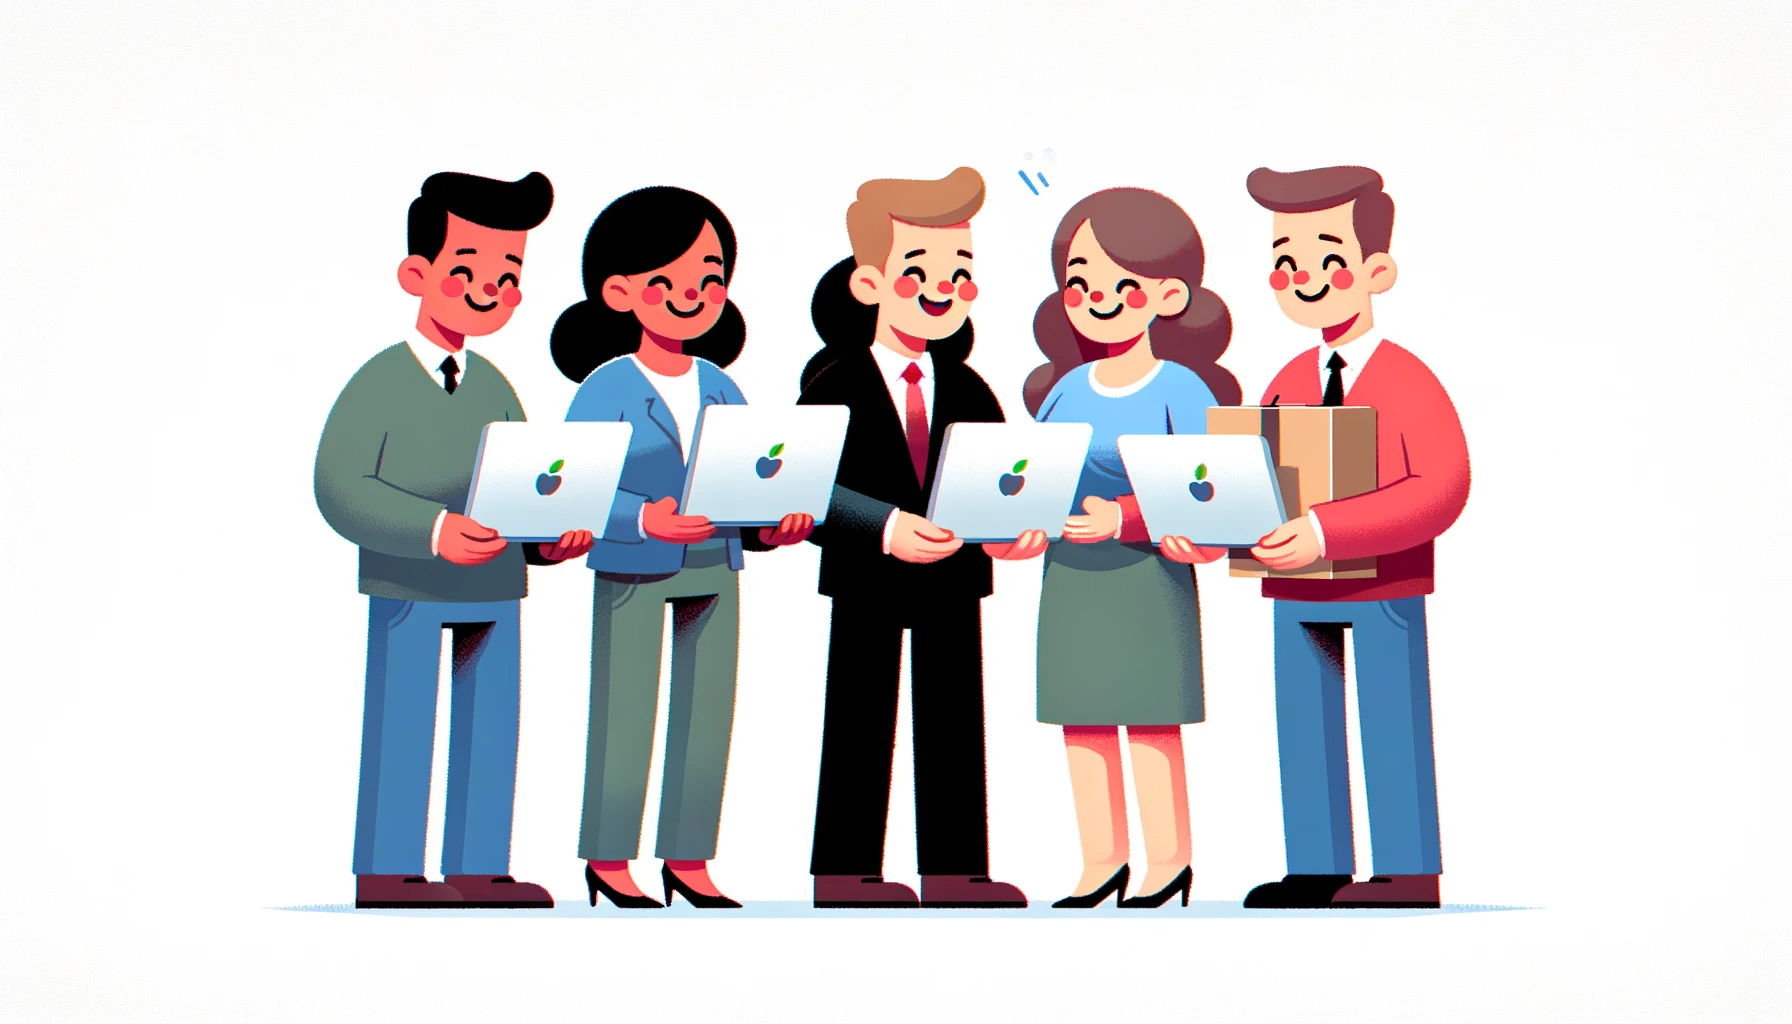 DALL·E 2023-12-07 10.03.38 - A simple cartoon image of a team receiving laptops. The scene shows a group of four diverse businesspeople, each happily receiving a laptop from their